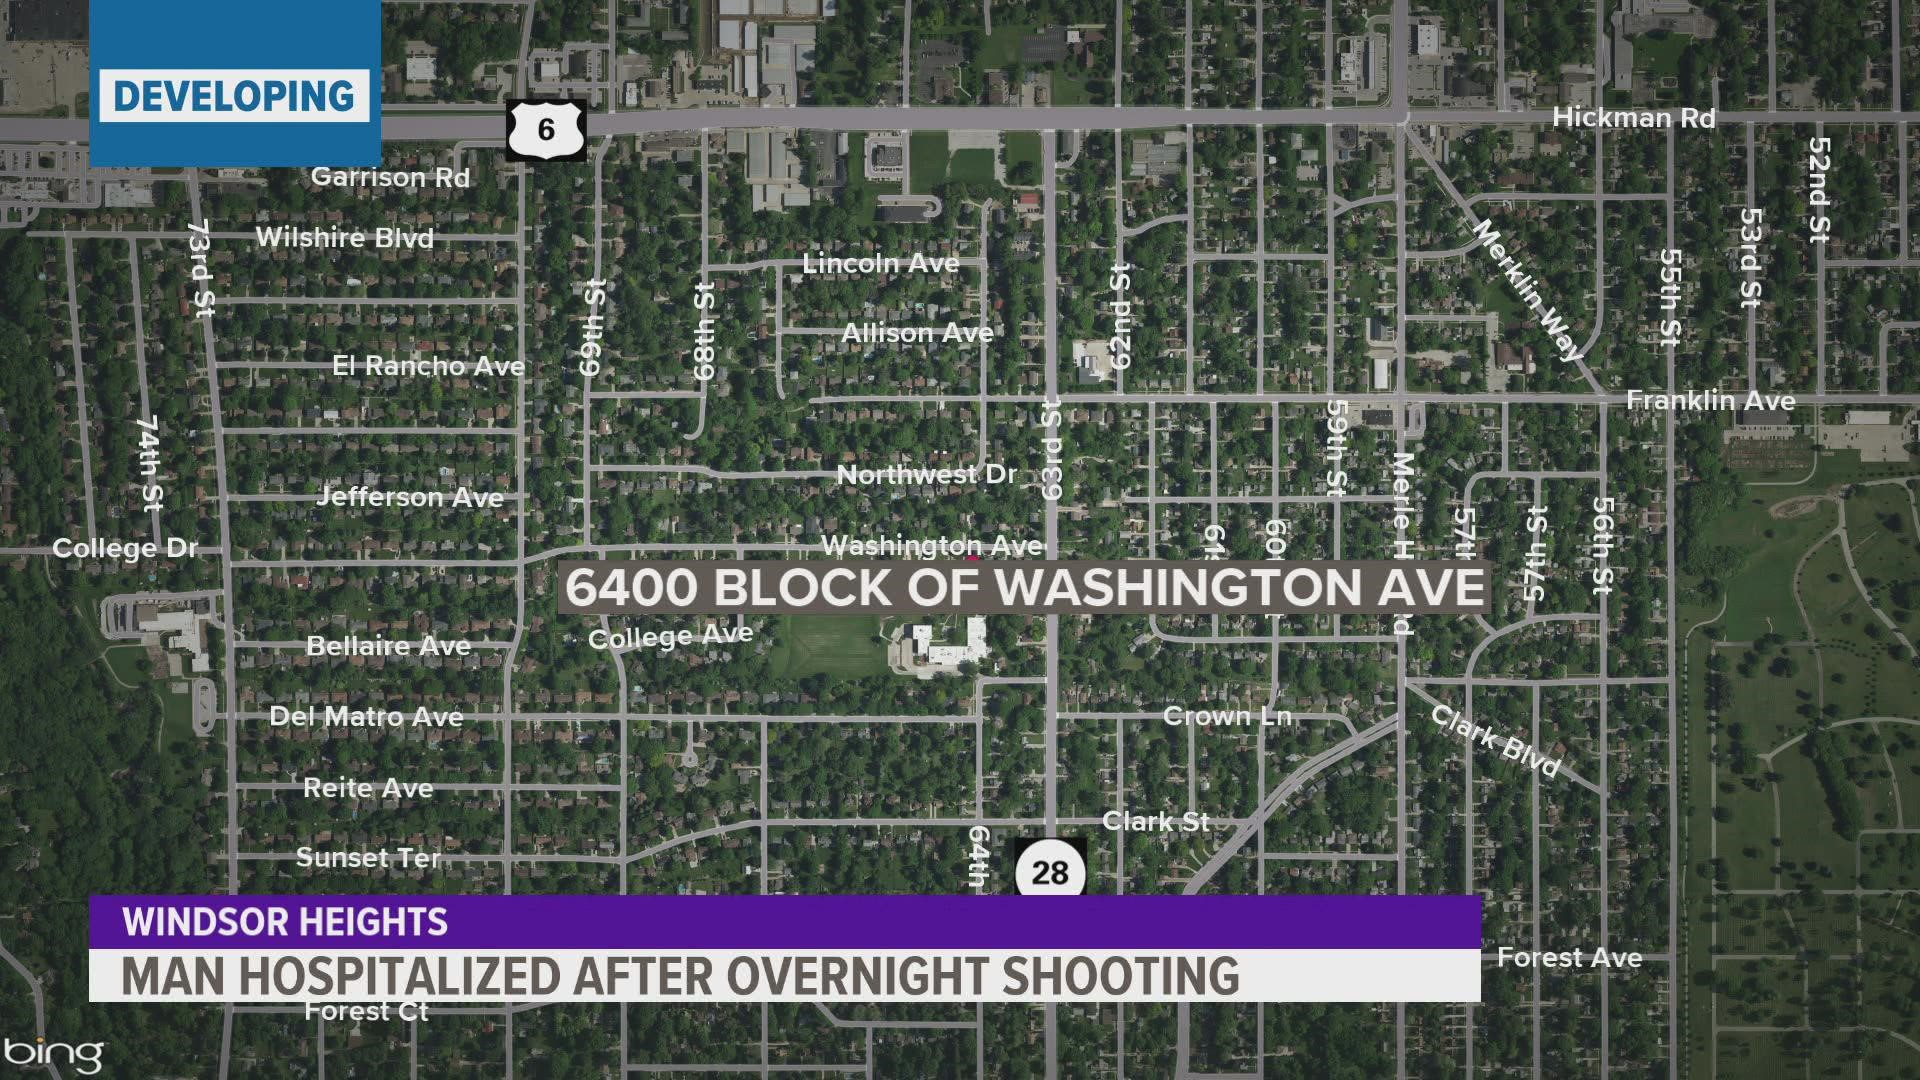 A man was shot after a fight early Saturday morning according to Windsor Heights Police.